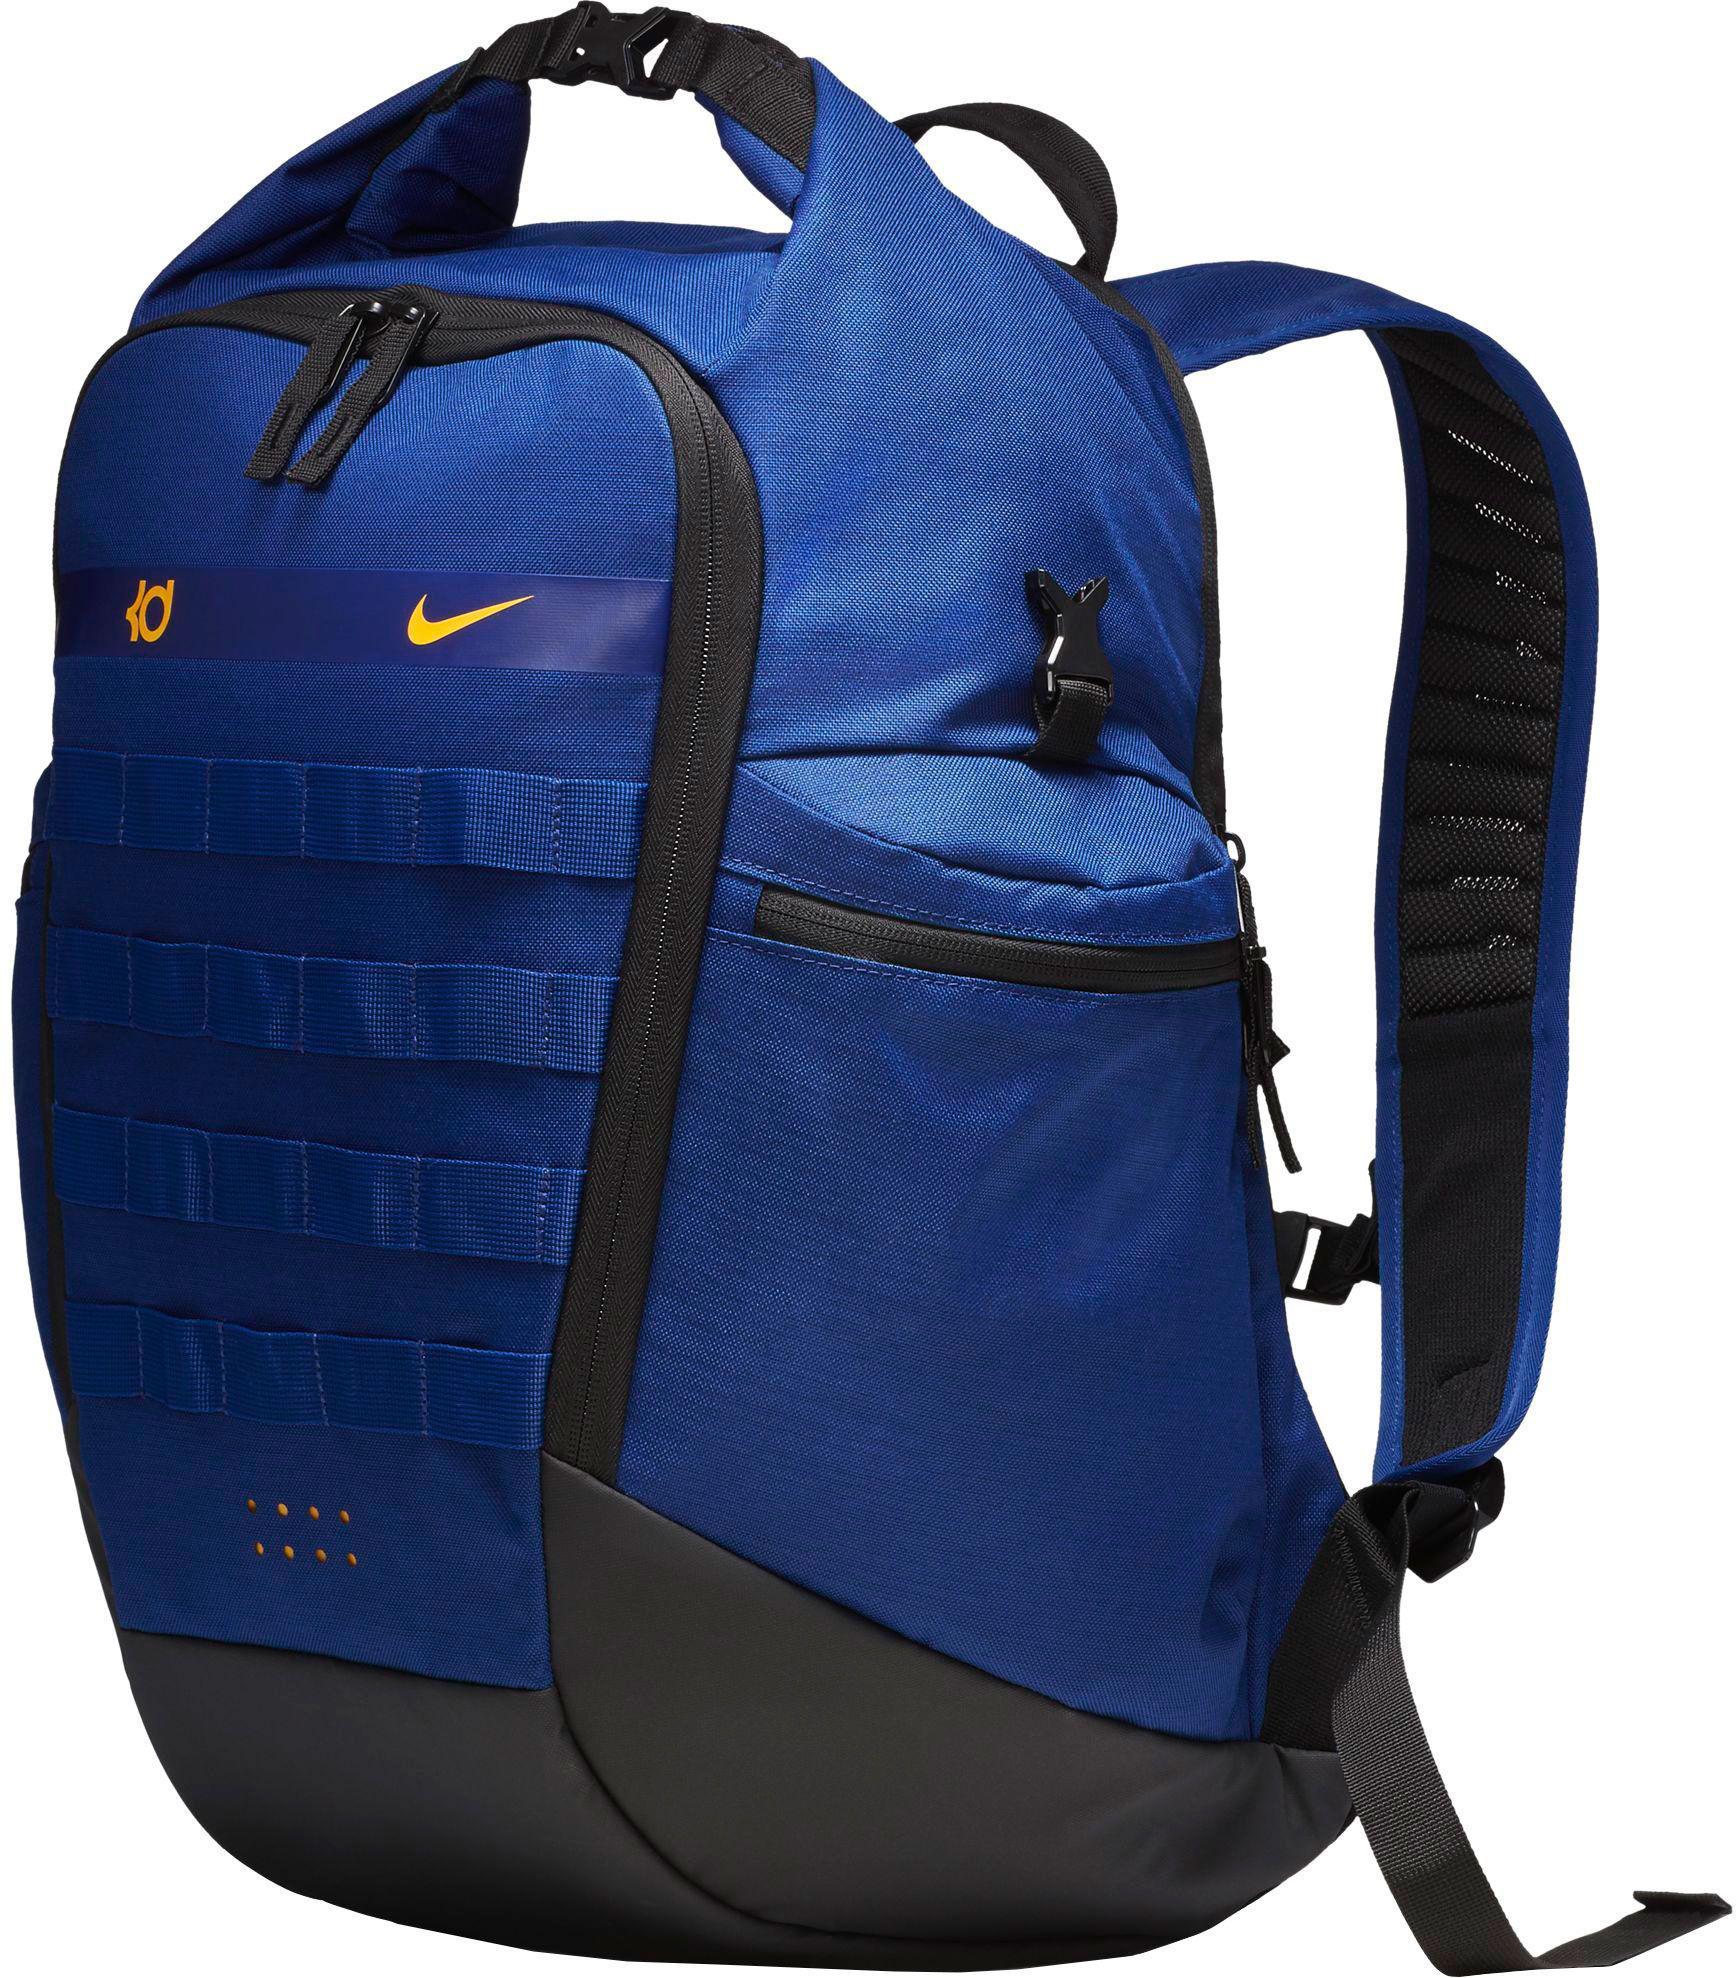 Nike Synthetic Kd Trey 5 Basketball Backpack in Blue for Men - Lyst